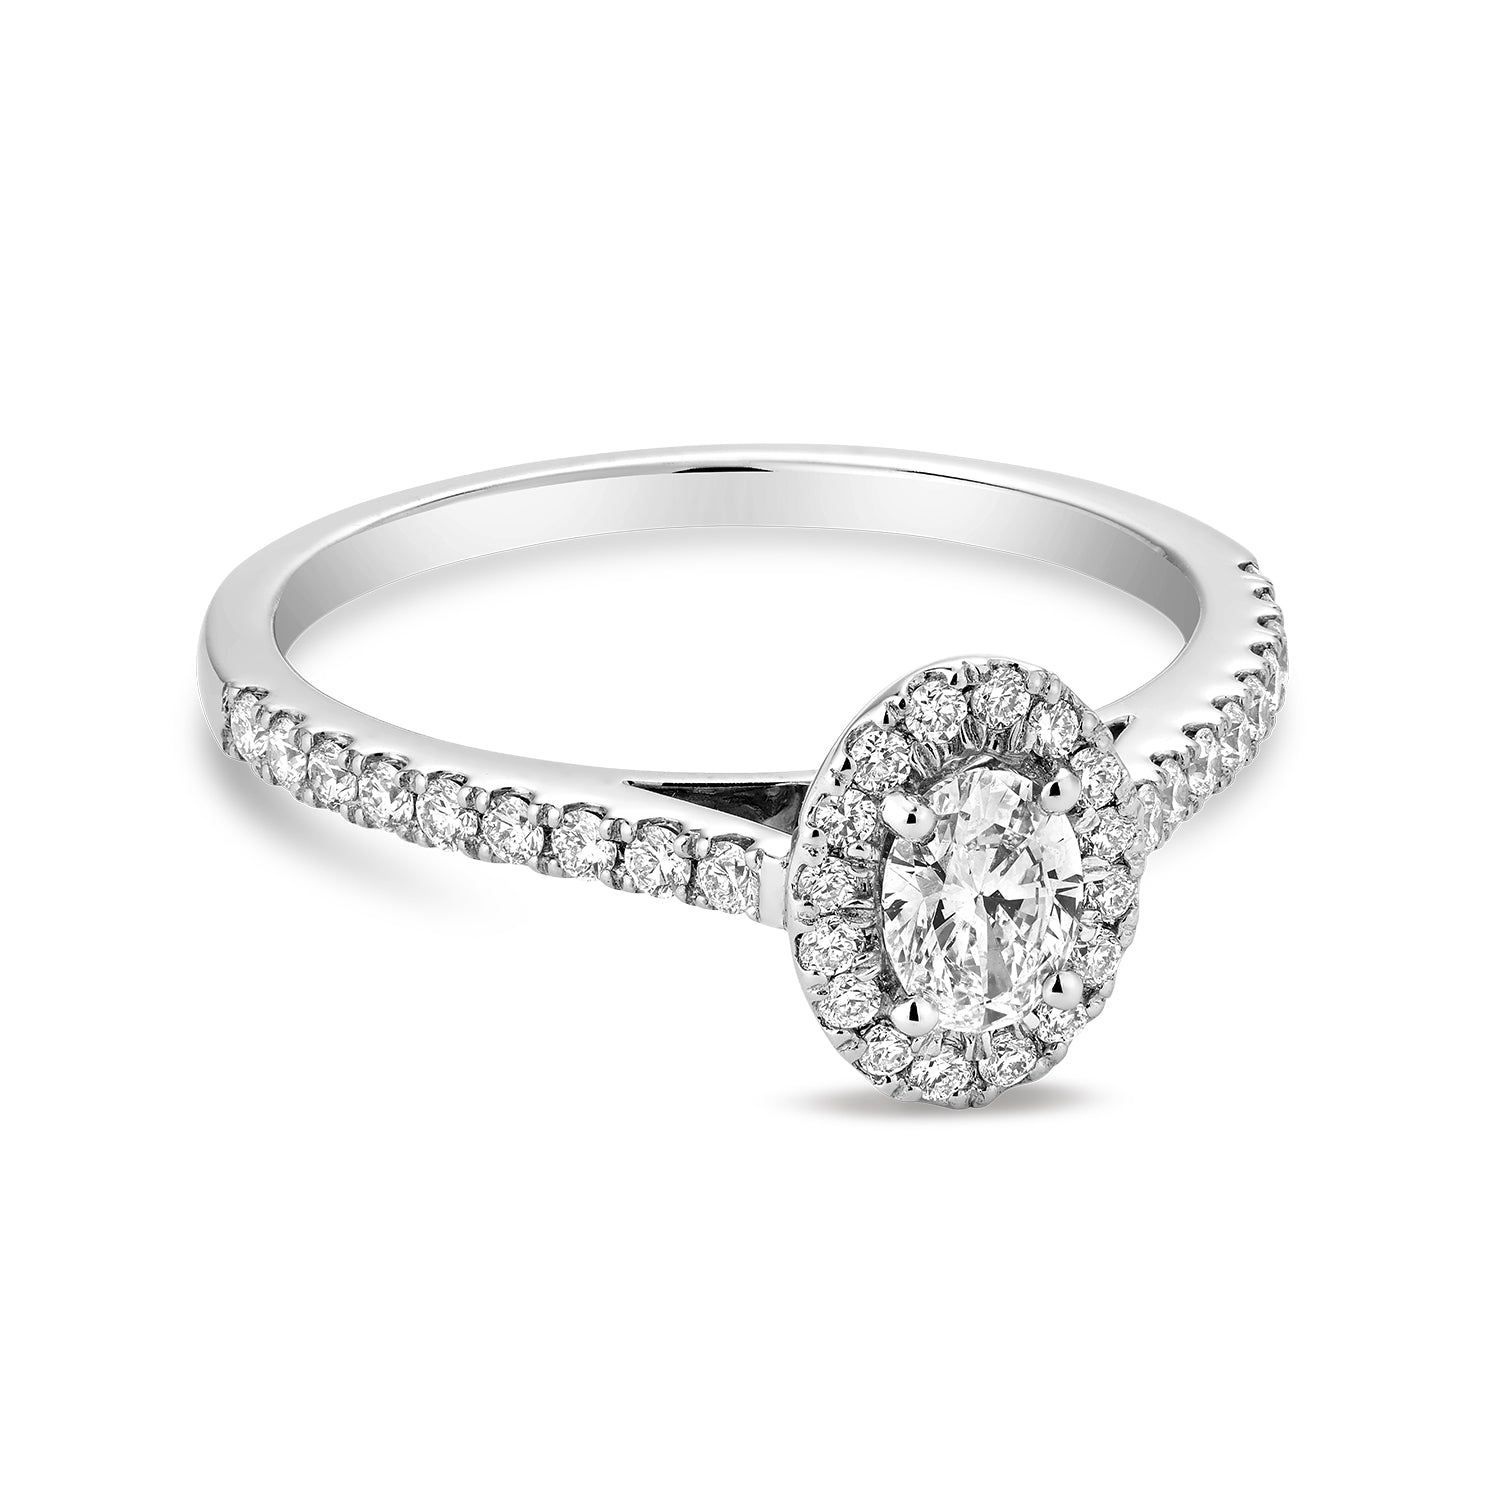 Hemsleys Collection 14K Oval Shape Diamond Engagement Ring with Oval Shape Halo